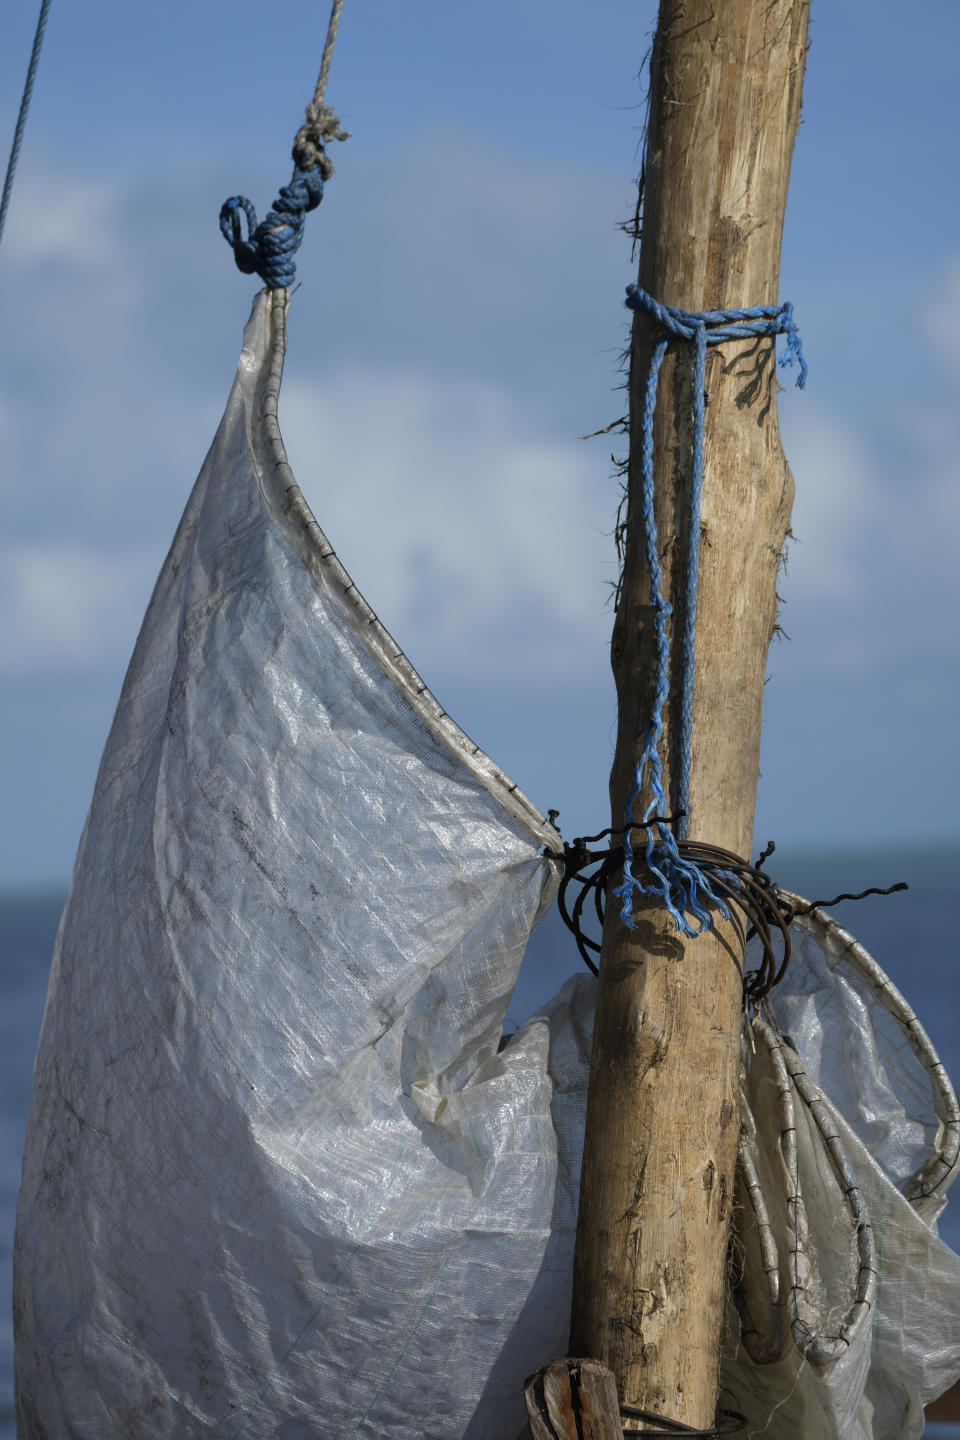 A sail and mast of a recently arrived rustic boat are shown, Wednesday, Jan. 4, 2023, in Islamorada, Fla. More than 500 Cuban immigrants have come ashore in the Florida Keys since the weekend, the latest in a large and increasing number who are fleeing the communist island. (AP Photo/Wilfredo Lee)